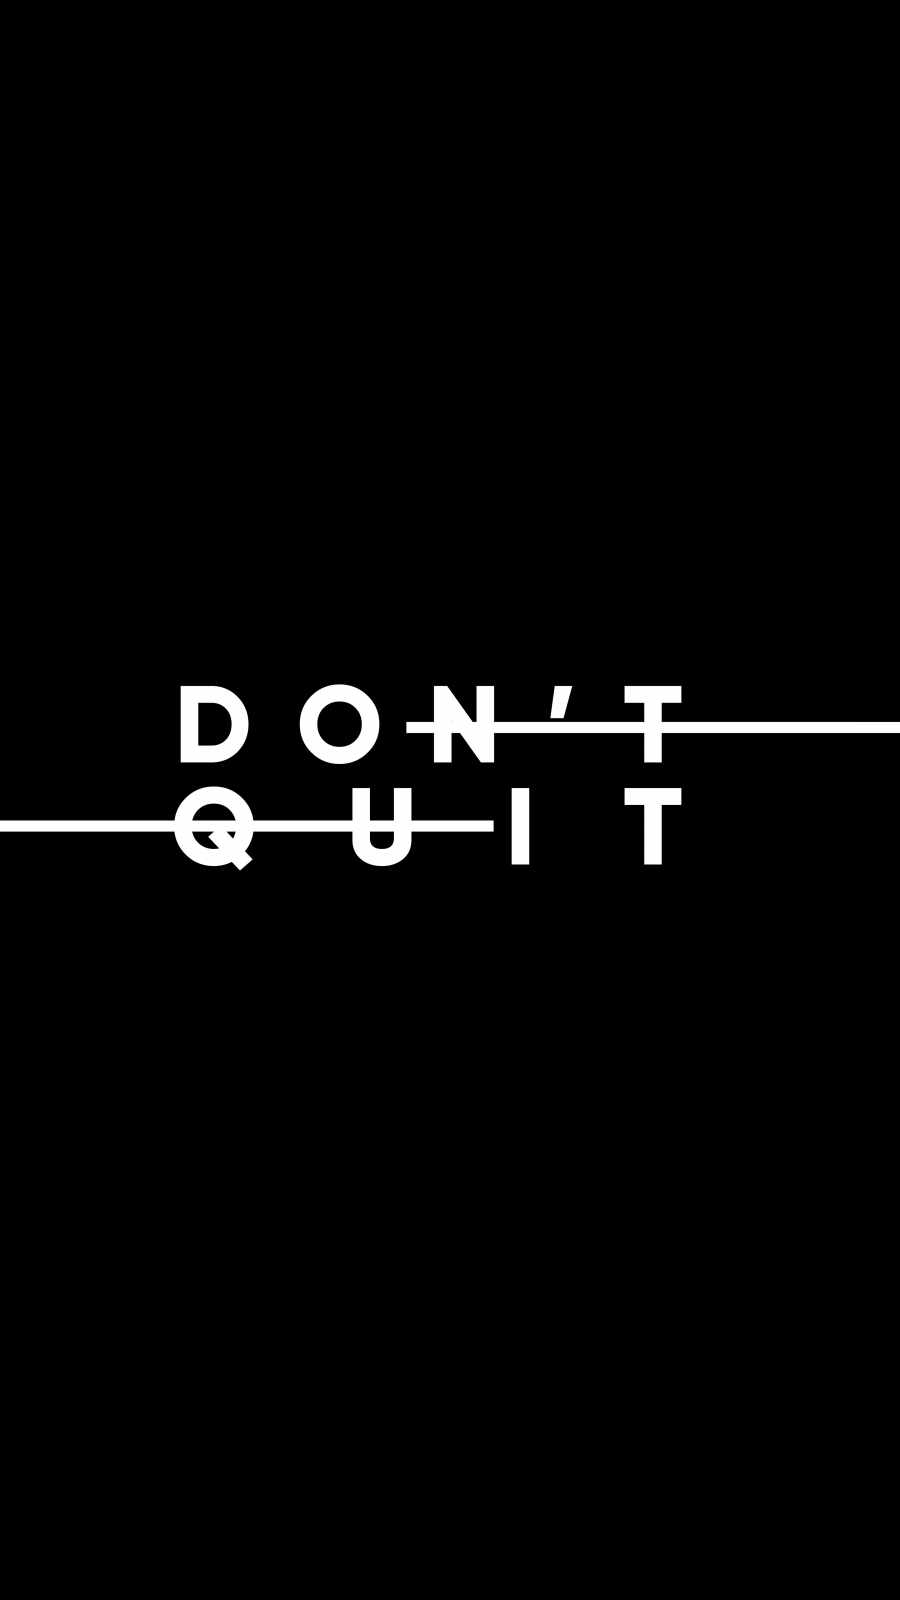 Do Not Quit IPhone Wallpaper - IPhone Wallpapers : iPhone Wallpapers